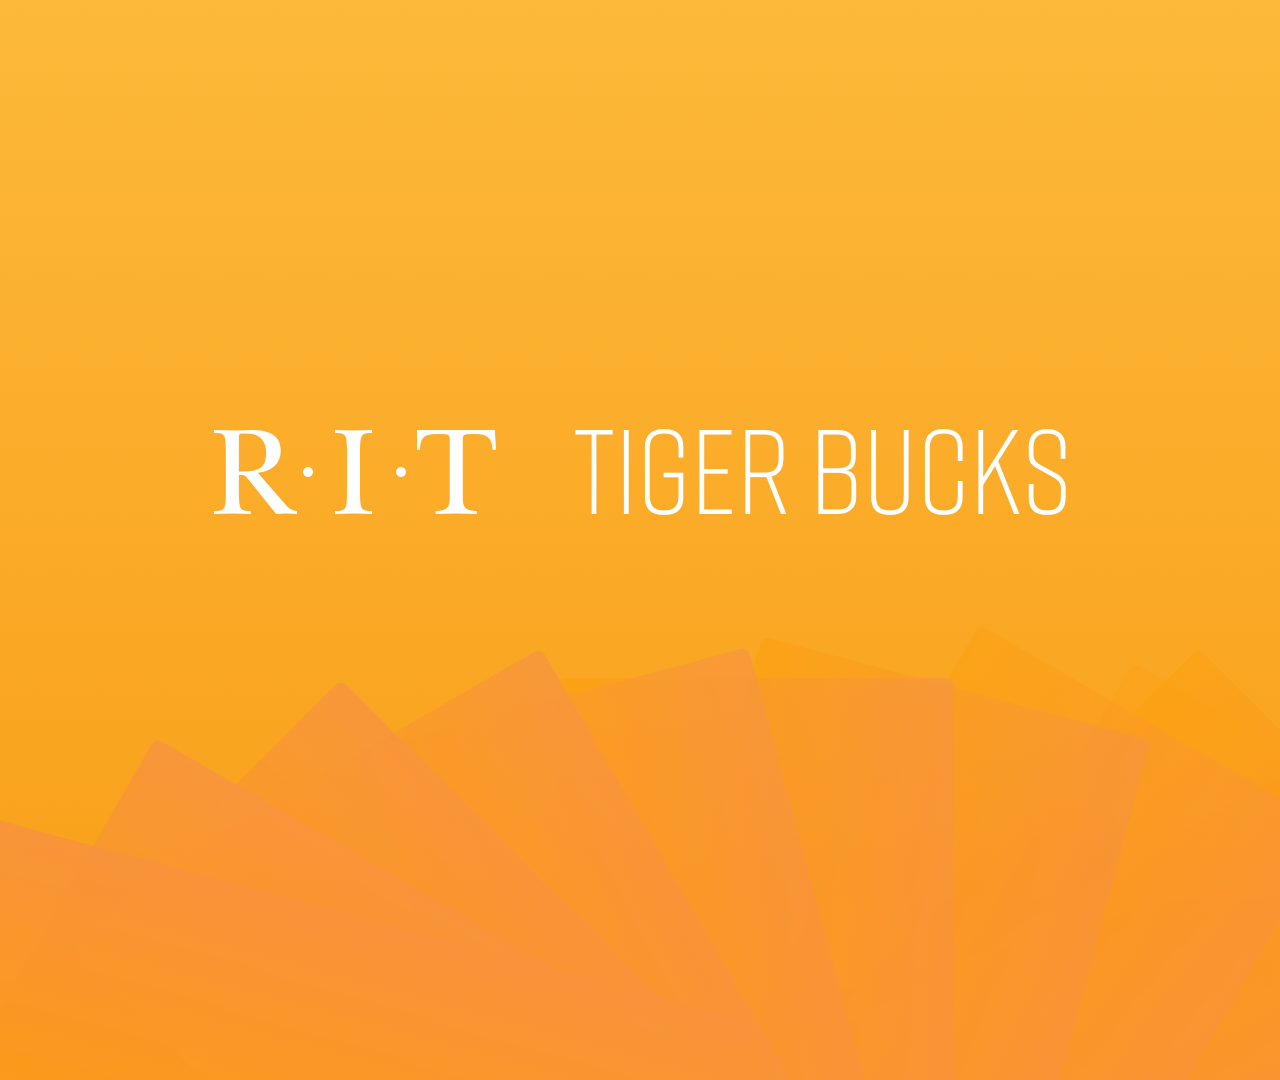 Tiger Bucks - App for RIT eServices System